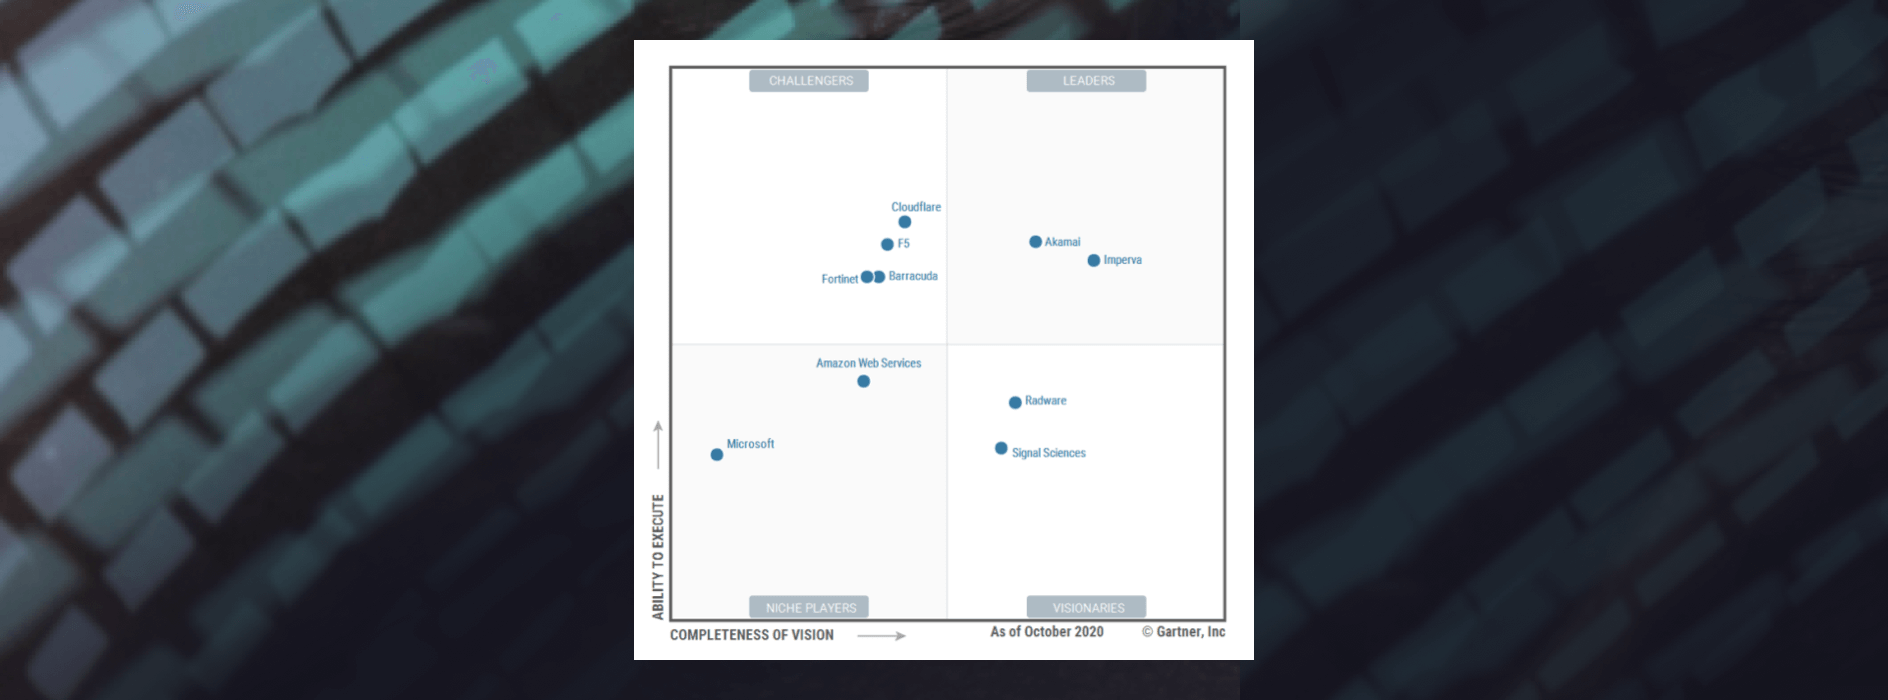 Imperva A Seven-Time Magic Quadrant Leader and Named Highest for Completeness of Vision for WAF